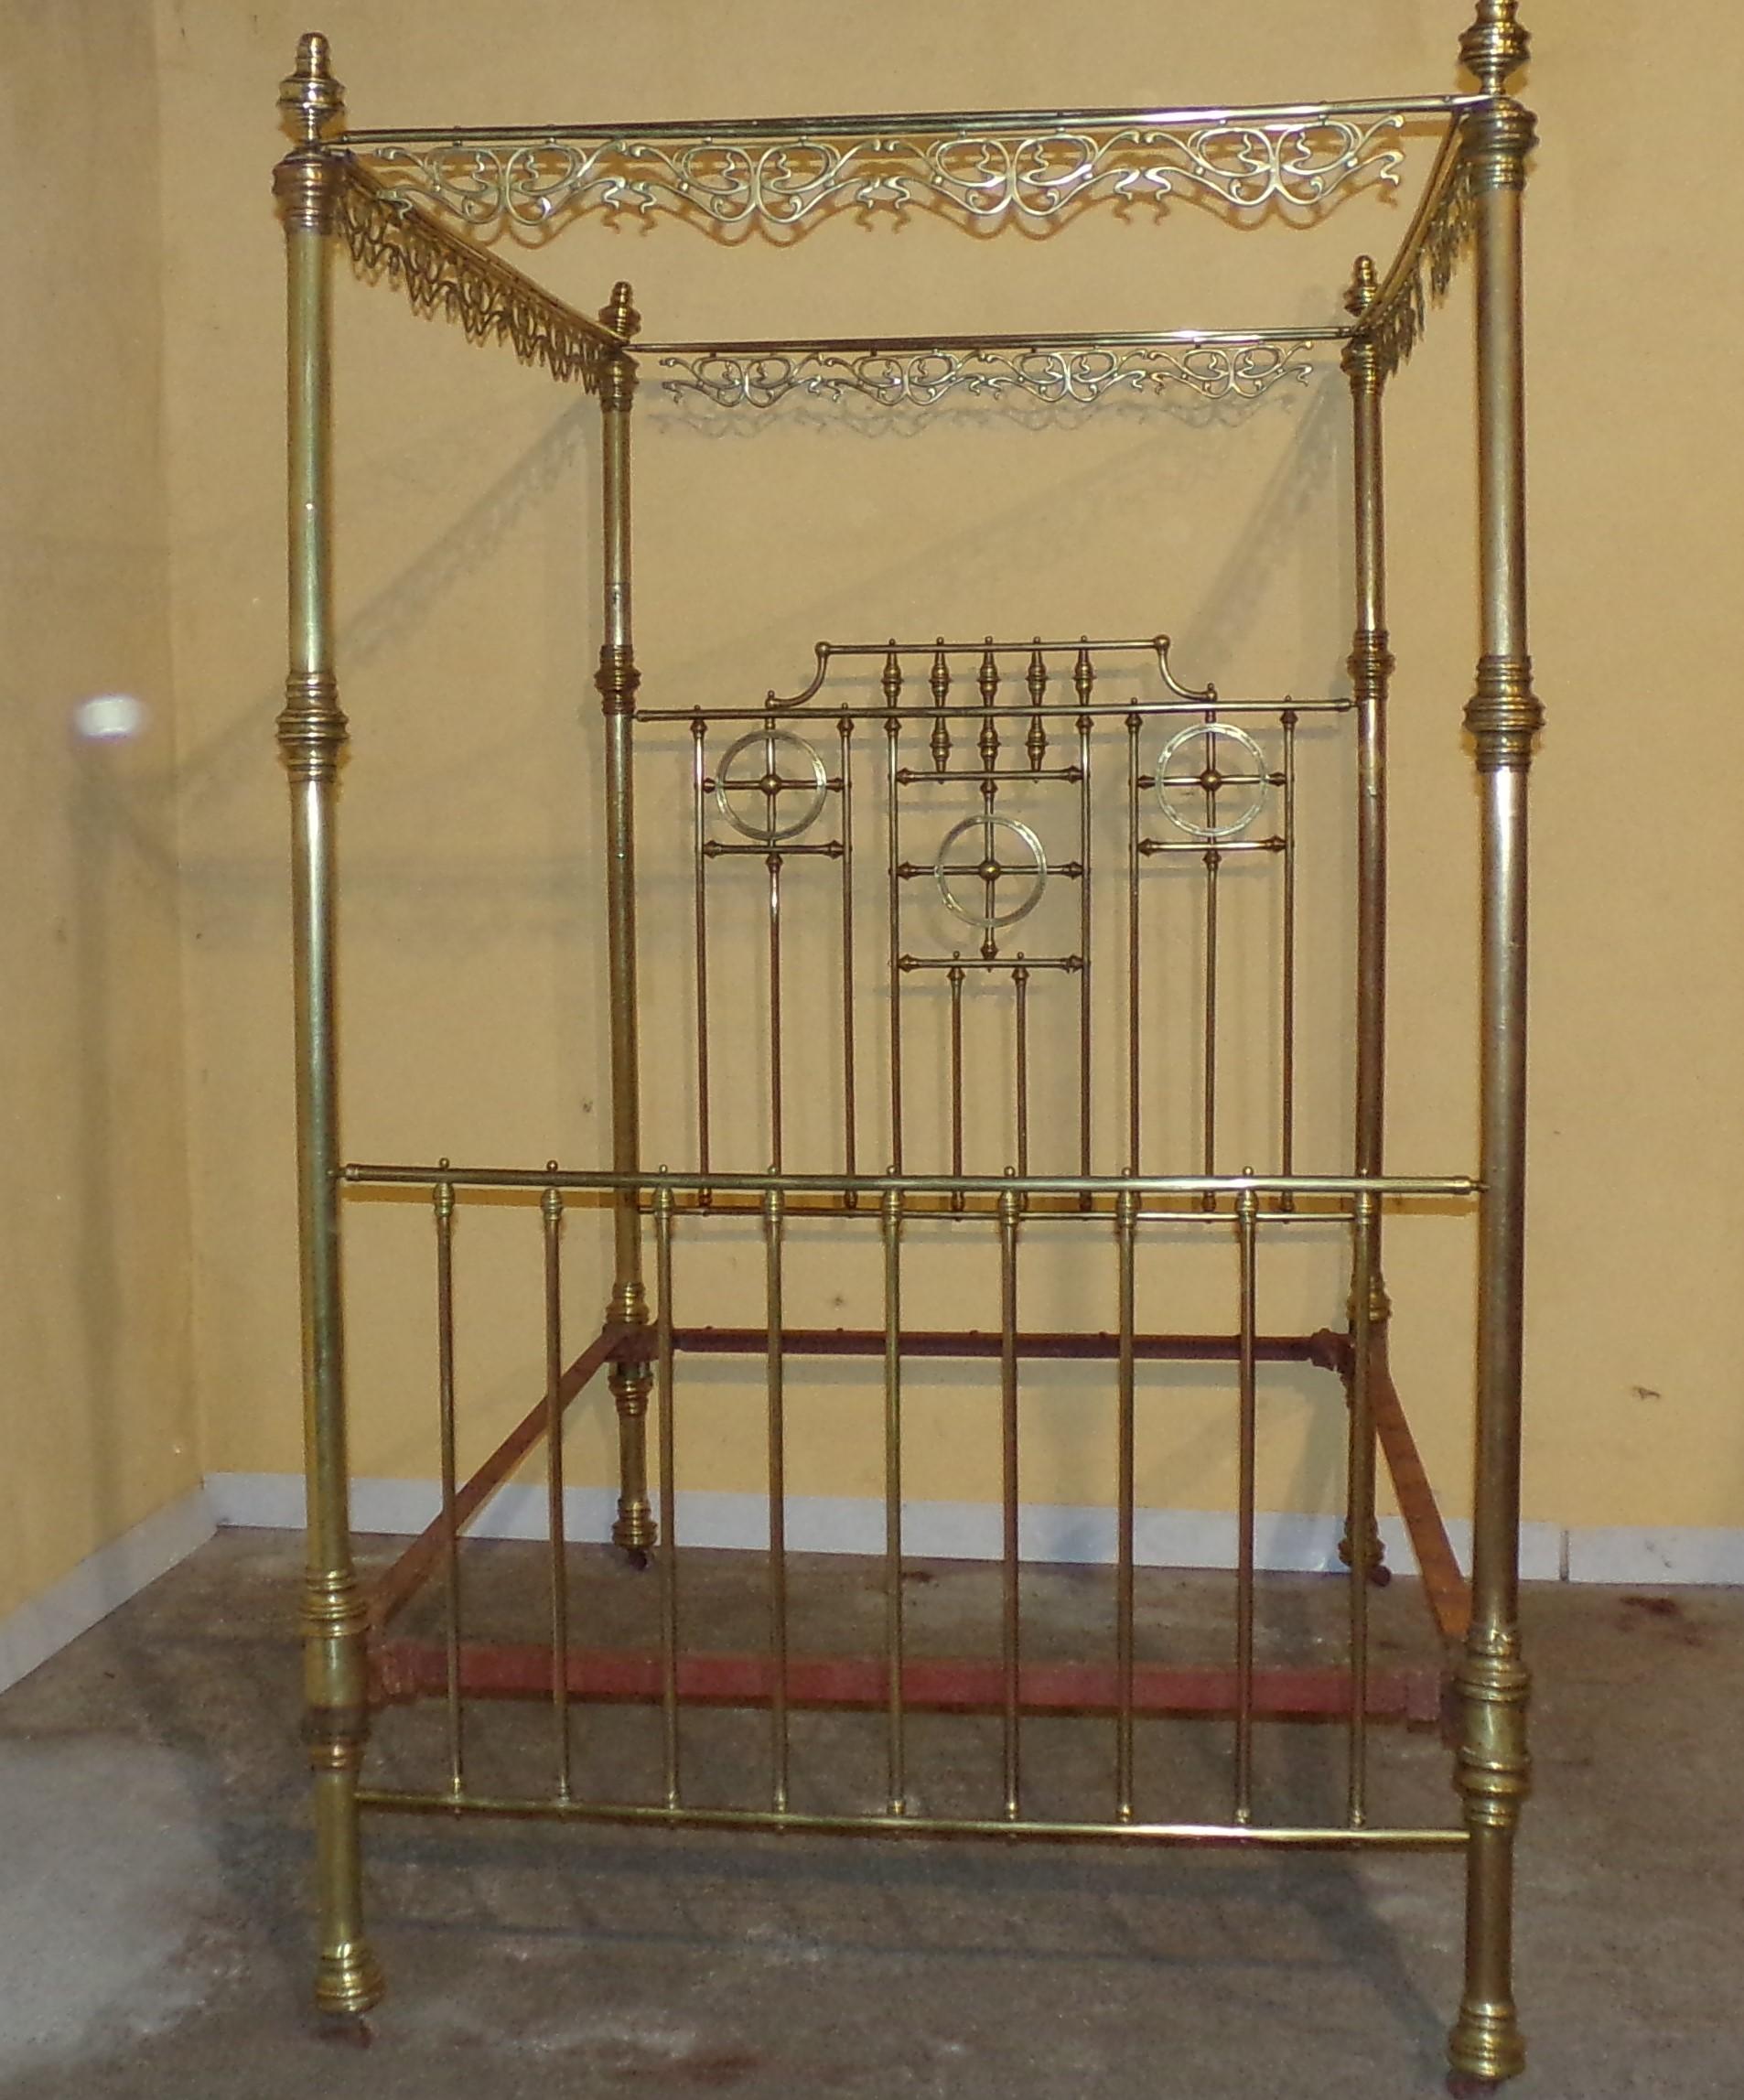 This beautiful Art Nouveau Queen size fourposter bed is all original and has been in the same family near Paris France since the 1890s. Beautifully proportioned, this fine bed will take a Queen size mattress. It is not clear in the photographs but